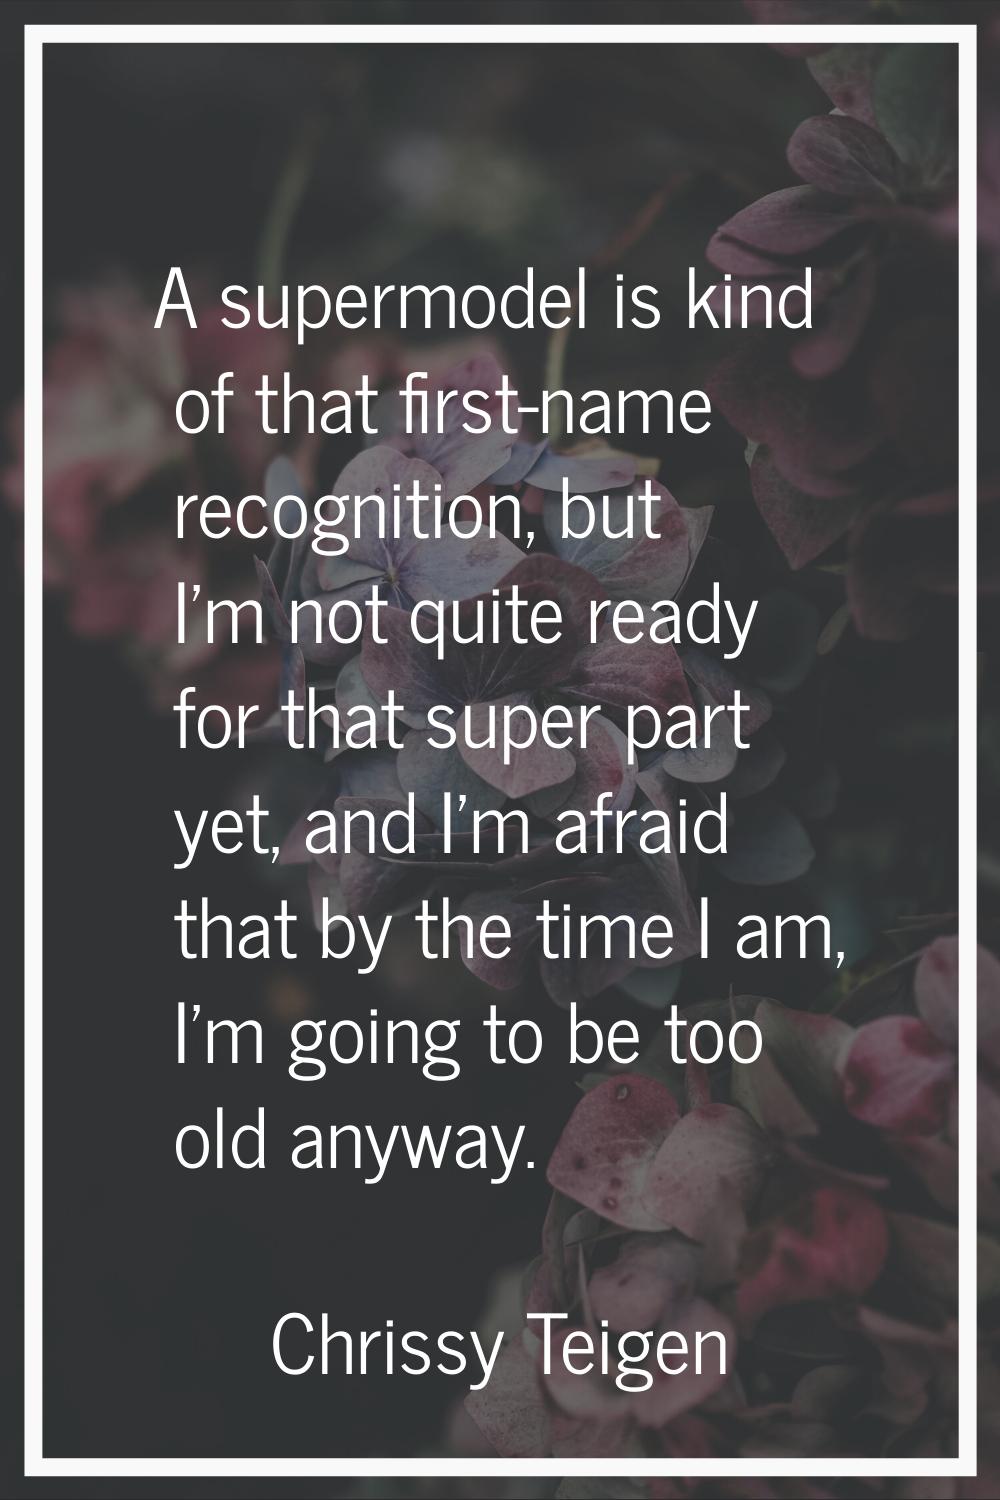 A supermodel is kind of that first-name recognition, but I'm not quite ready for that super part ye